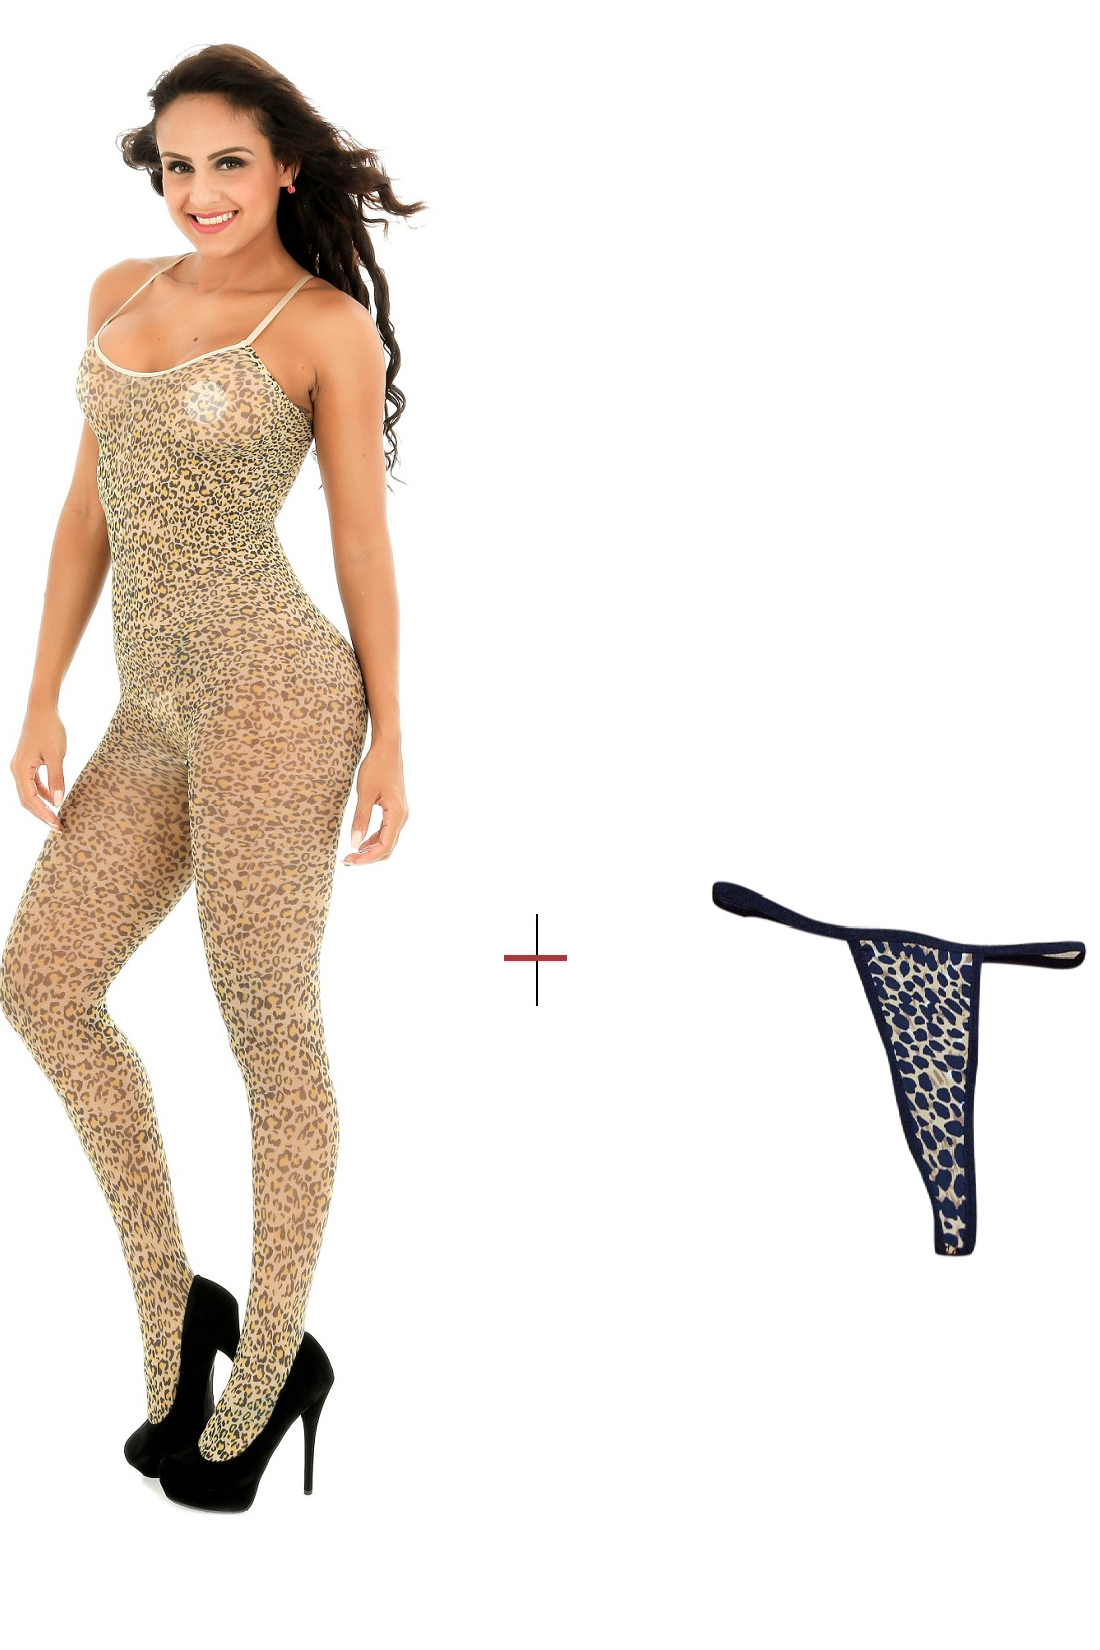 Kaamastra Crotchless Leopard Bodystocking & Free Thong